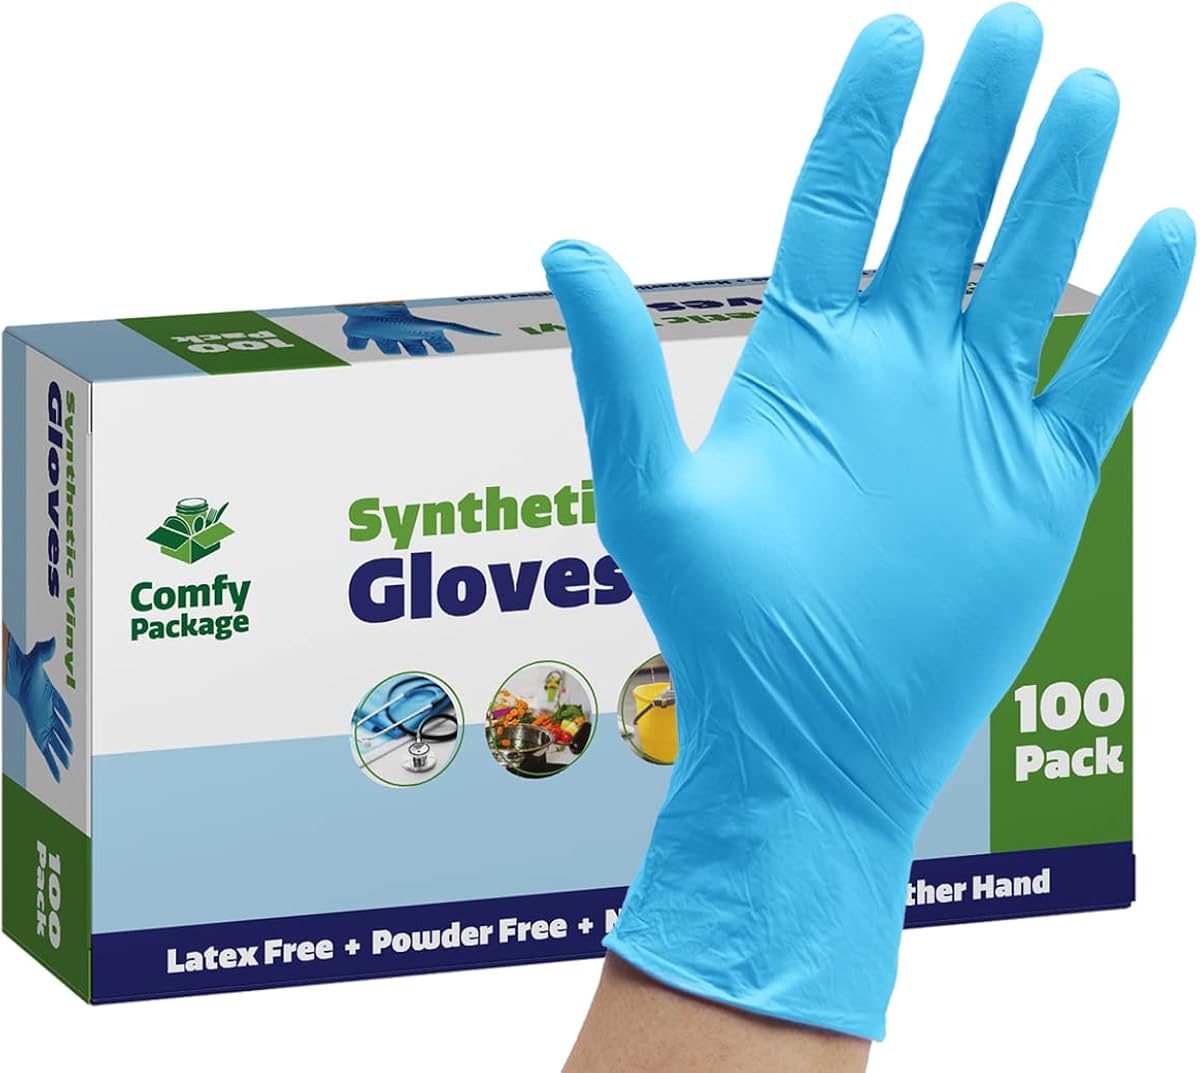 Synthetic Vinyl-Nitrile Blend Disposable Plastic Gloves | Powder Free, Latex Free & Rubber Free